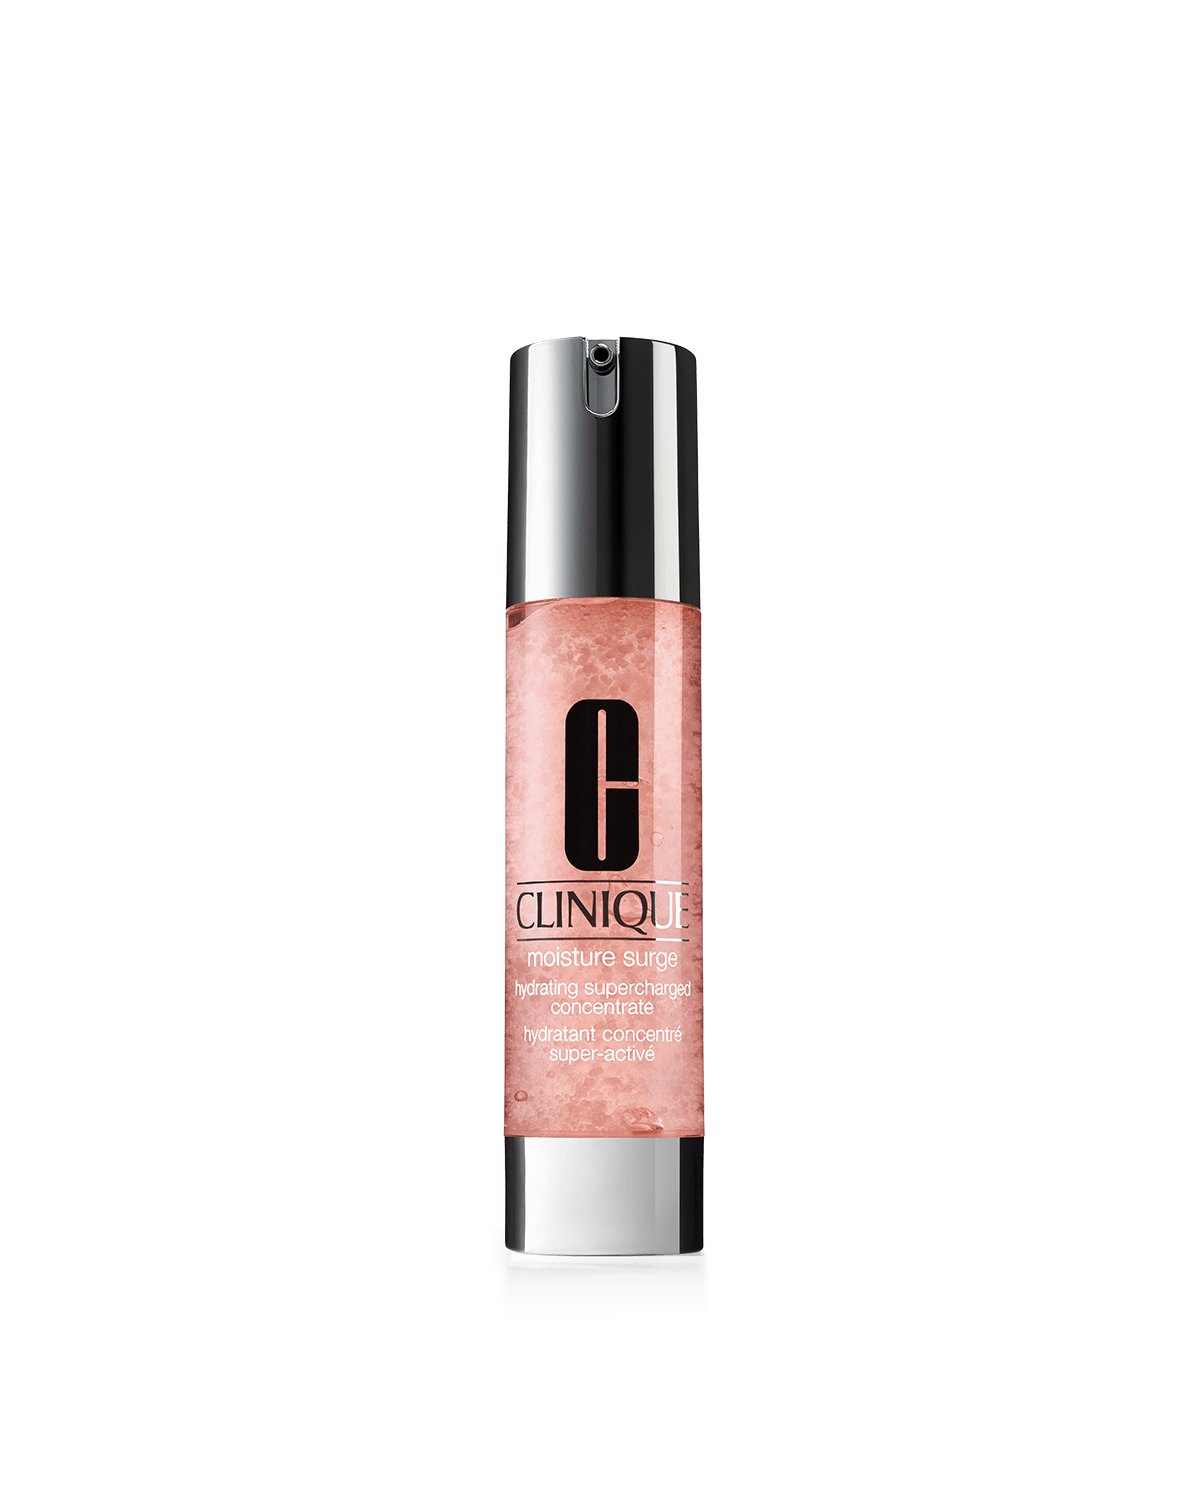 Icon image of Moisture Surge™ Hydrating Supercharged Concentrate for side-by-side ingredient comparison.